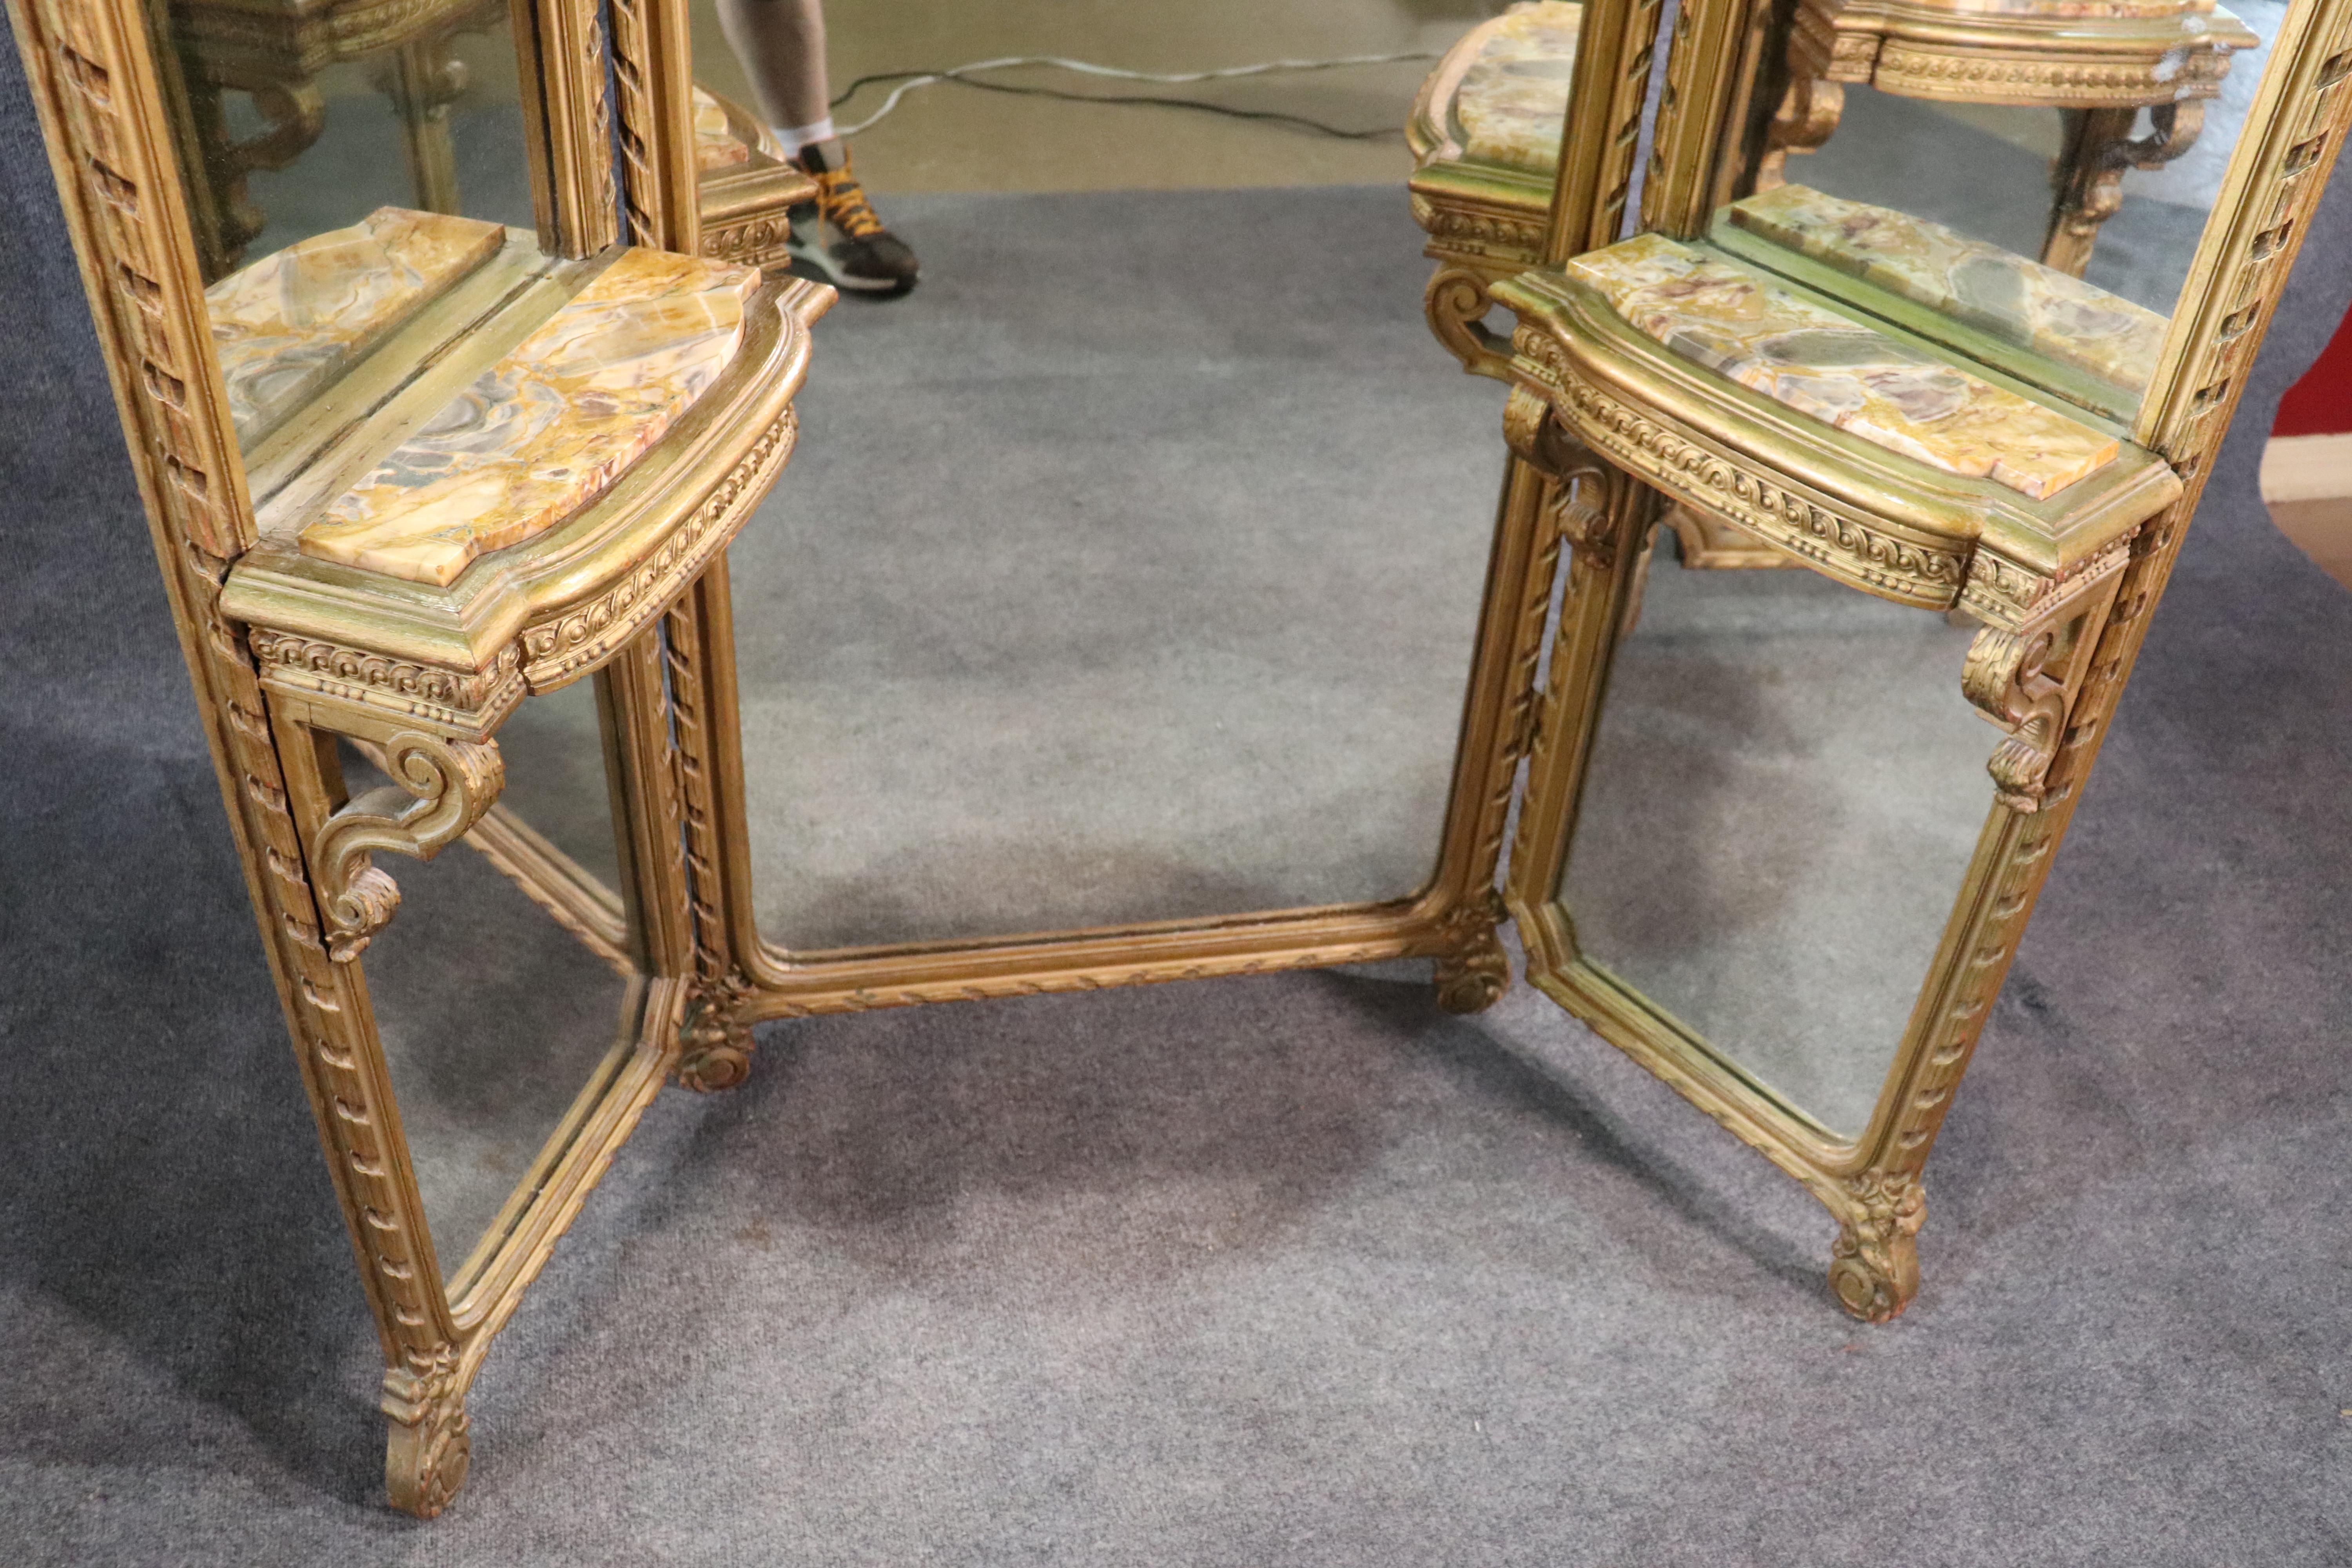 This is one of the finer French folding carved ladies vanities we have had in a long time. The carving and original gold surface are spectacular and extremely well done. The marble is a very unique color palette and is very pleasant to look at. The